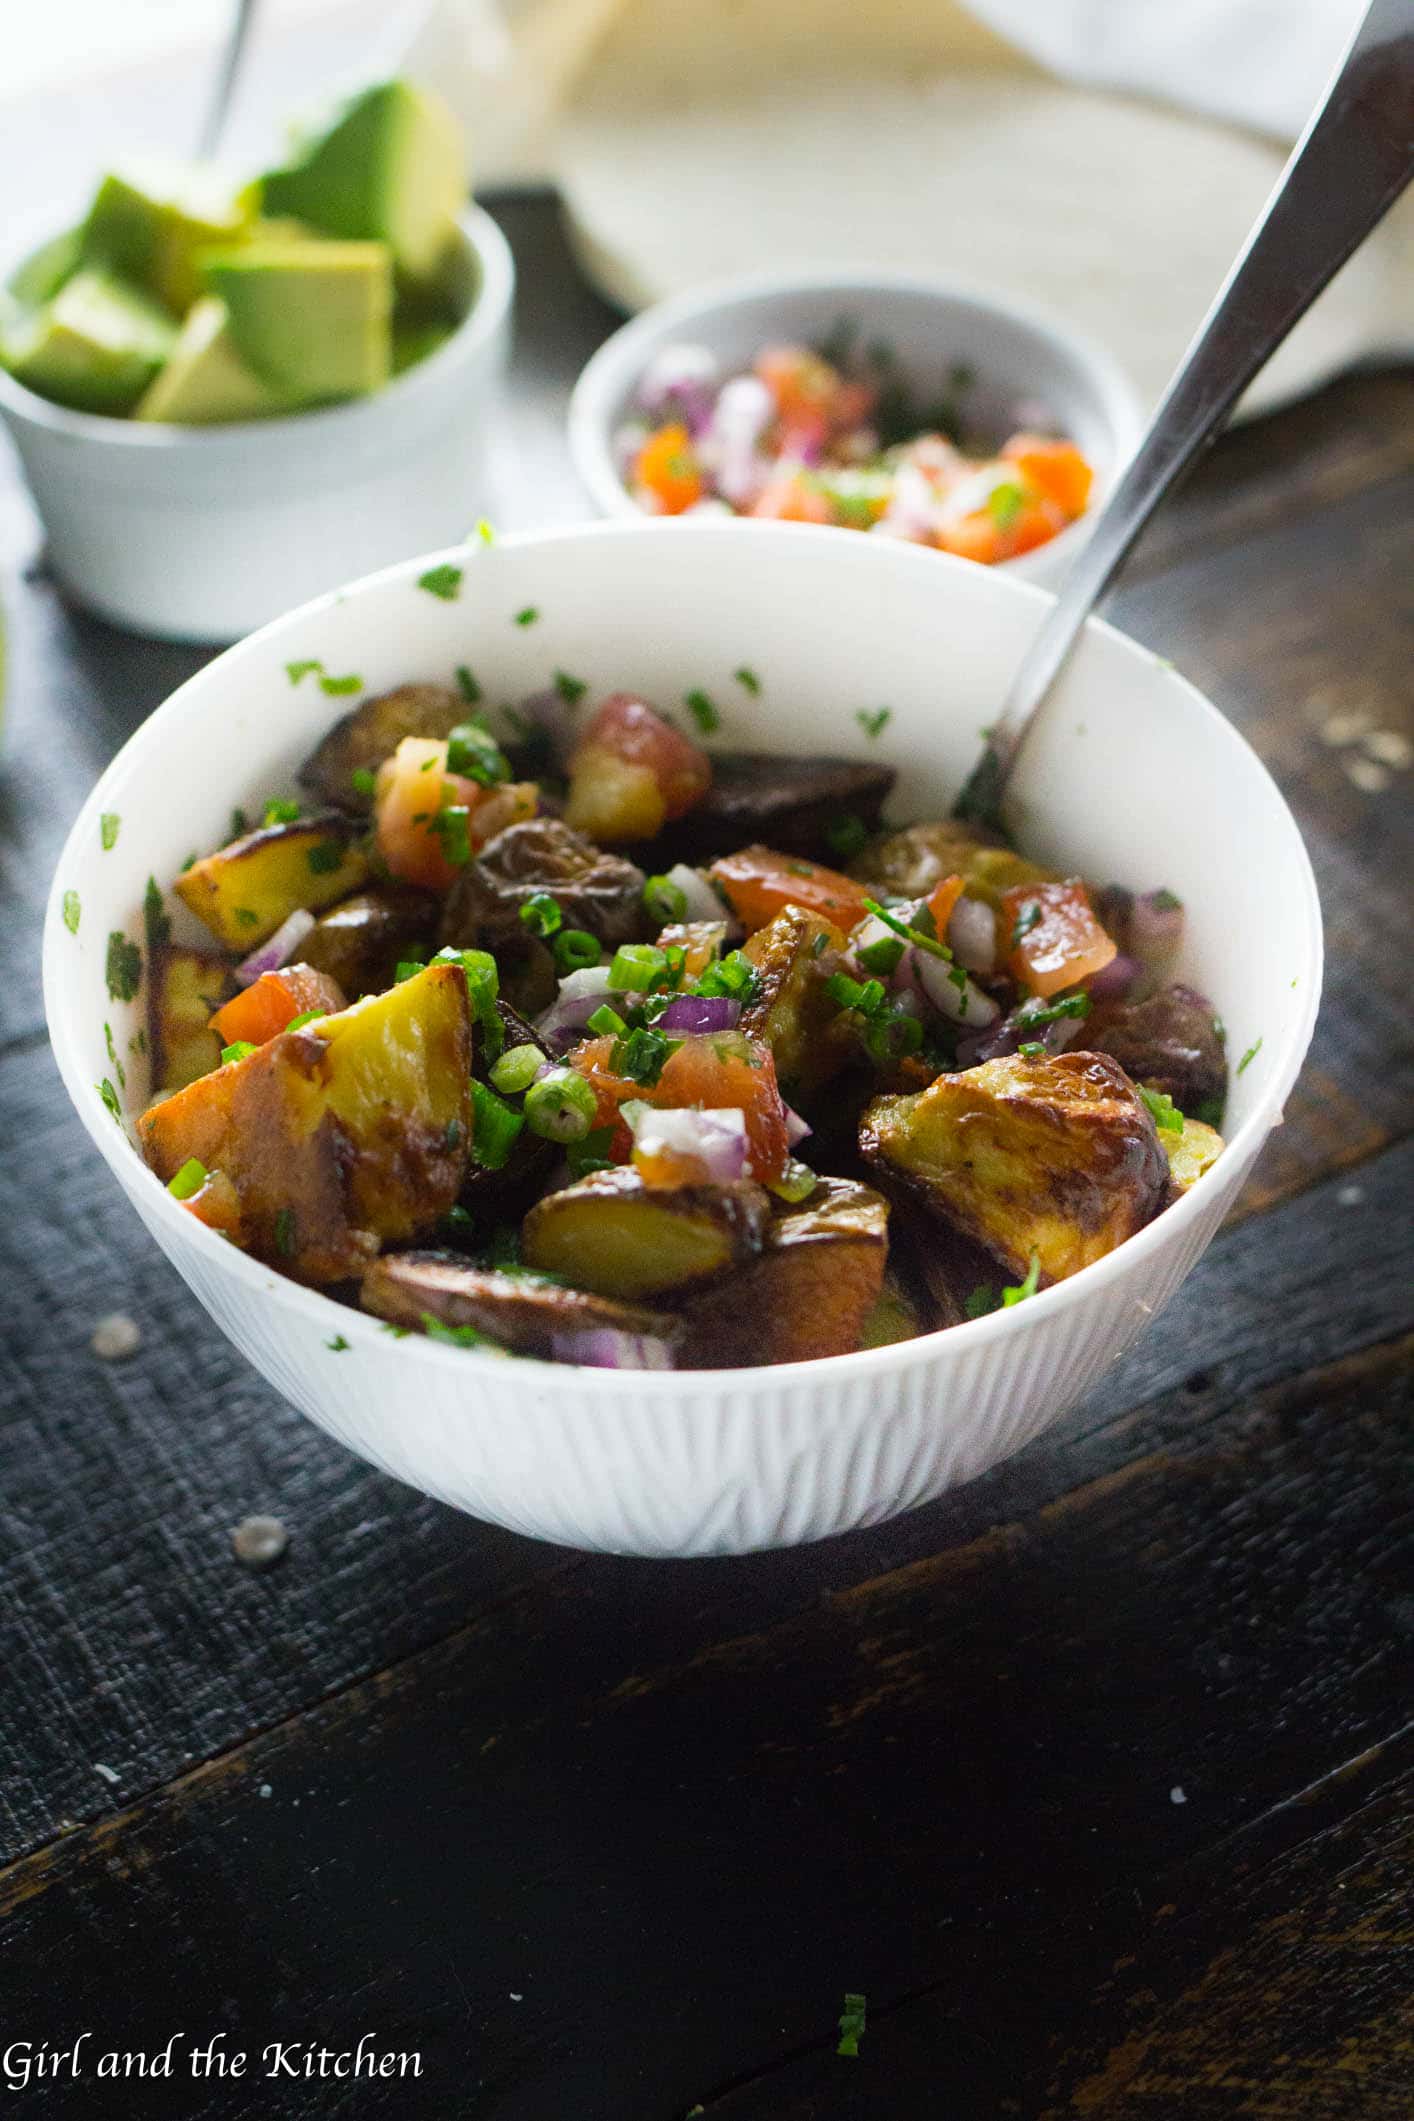 Classic roasted potatoes baked with classic Mexican spices and tossed together with a zesty pico de gallo! Great served warm or as a healthy alternative to a potato salad!